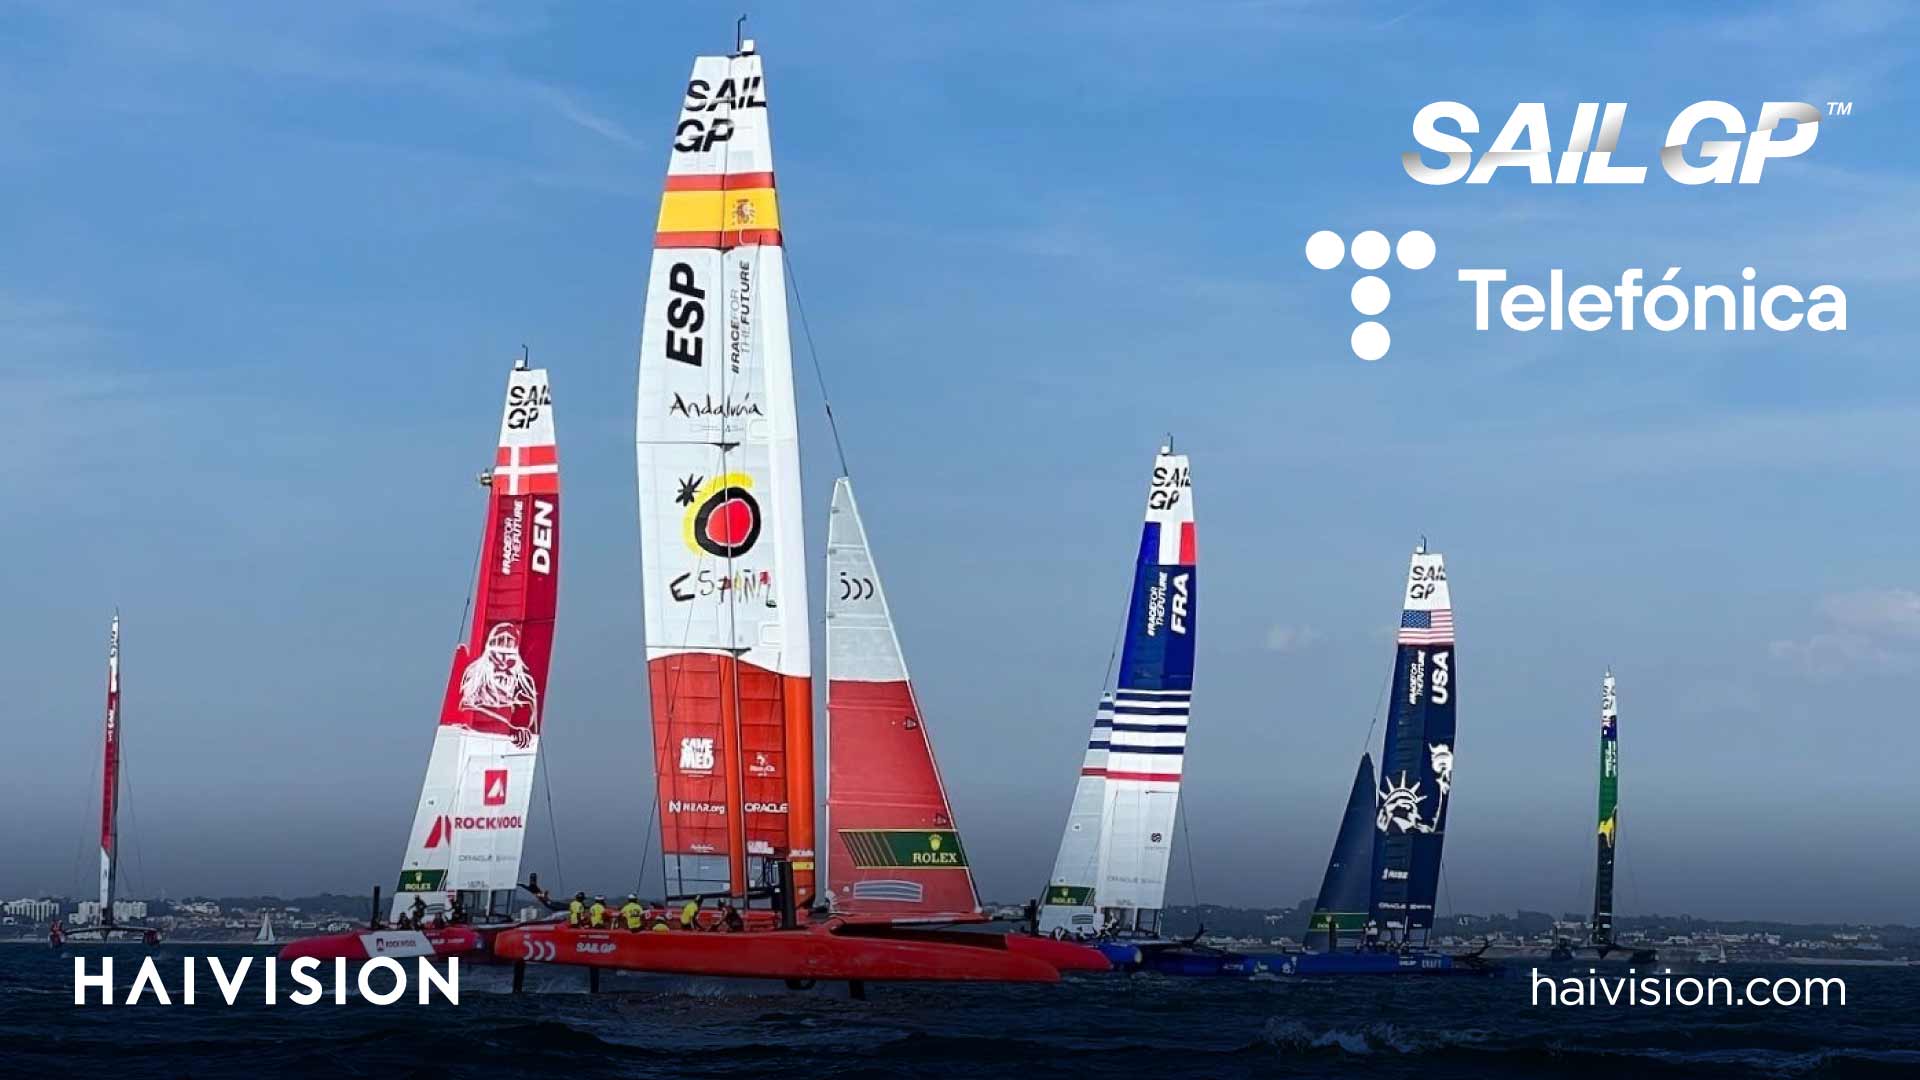 Telefónica field-tests Haivision Air320 on drones over 5G networks at the Spain SailGP race